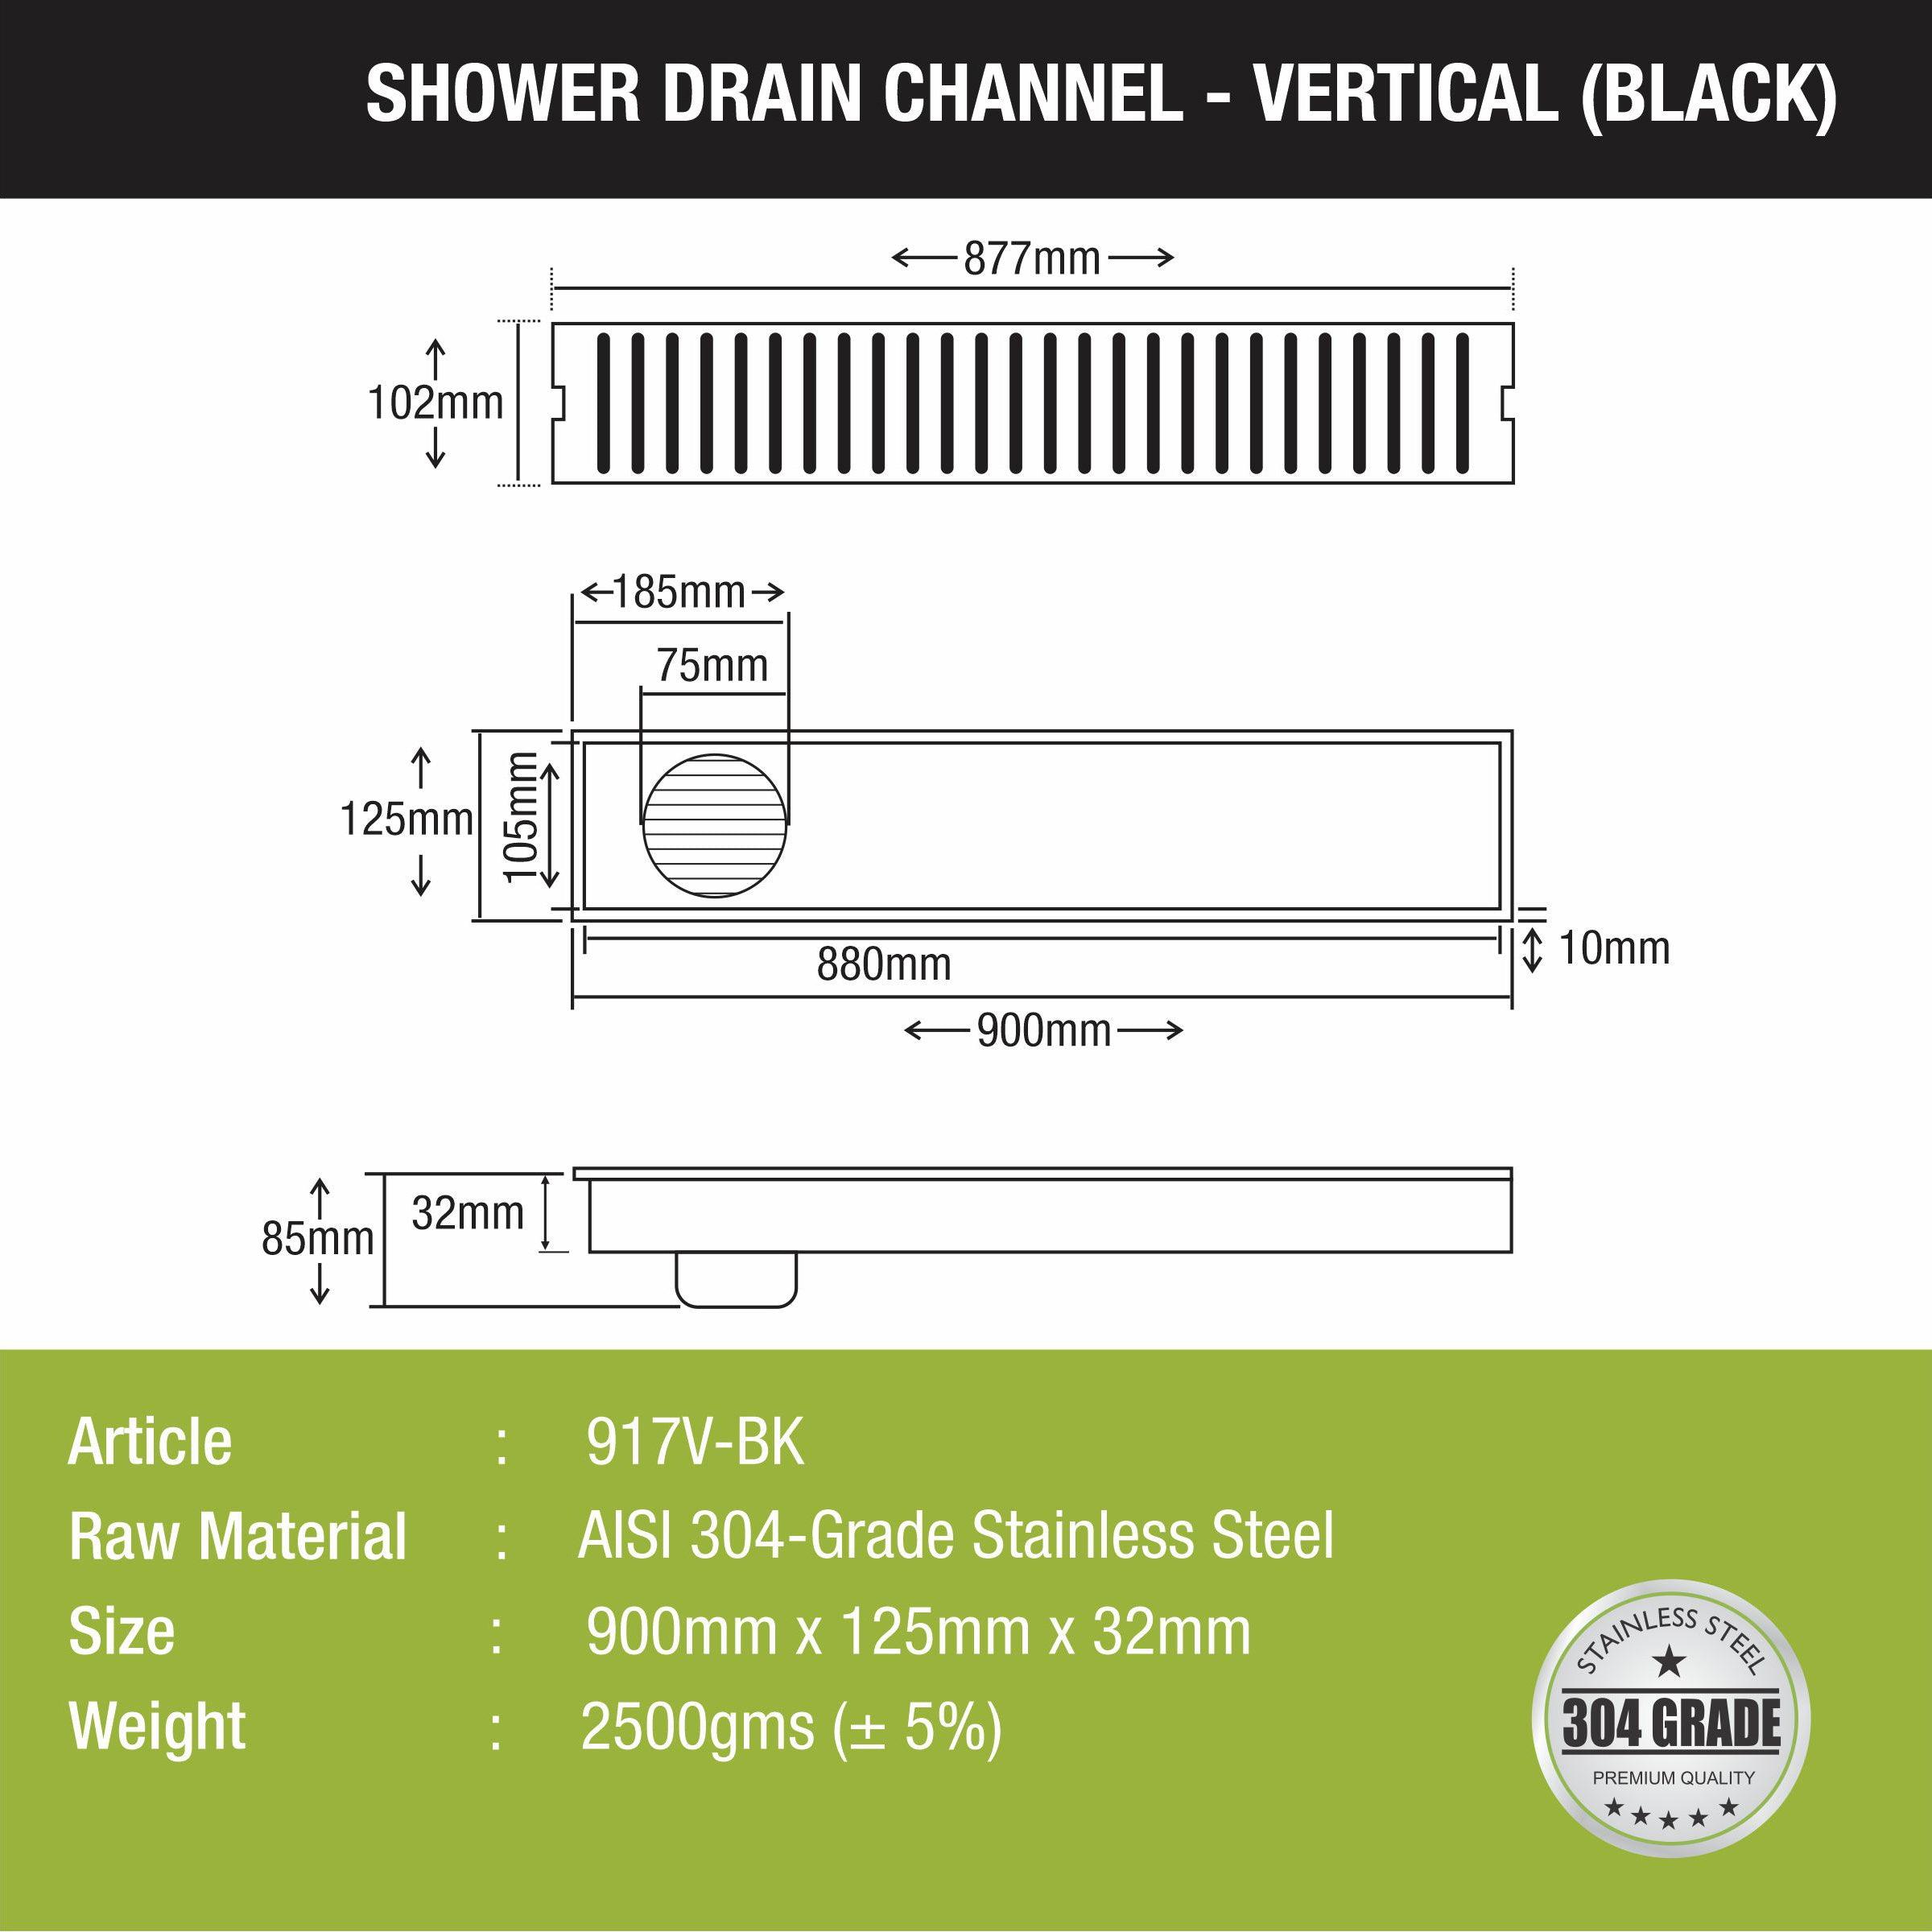 Vertical Shower Drain Channel - Black (36 x 5 Inches) size and measurement